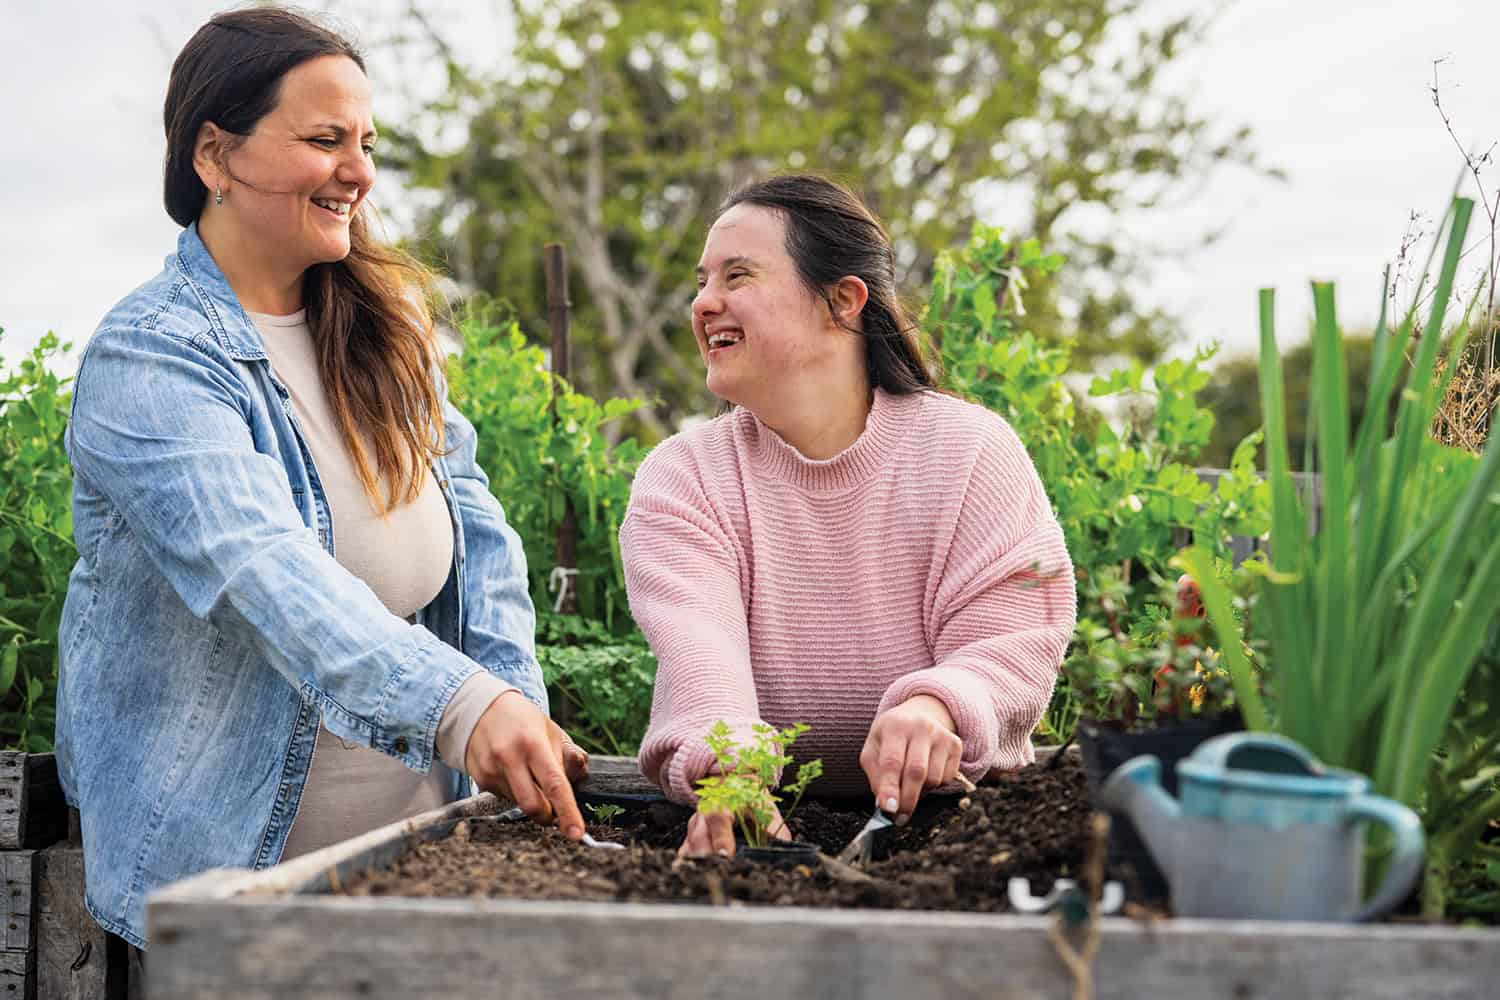 Smiling woman with Downs syndrome using a trowel to plant a plant in a raised bed, accompanied by an older woman.